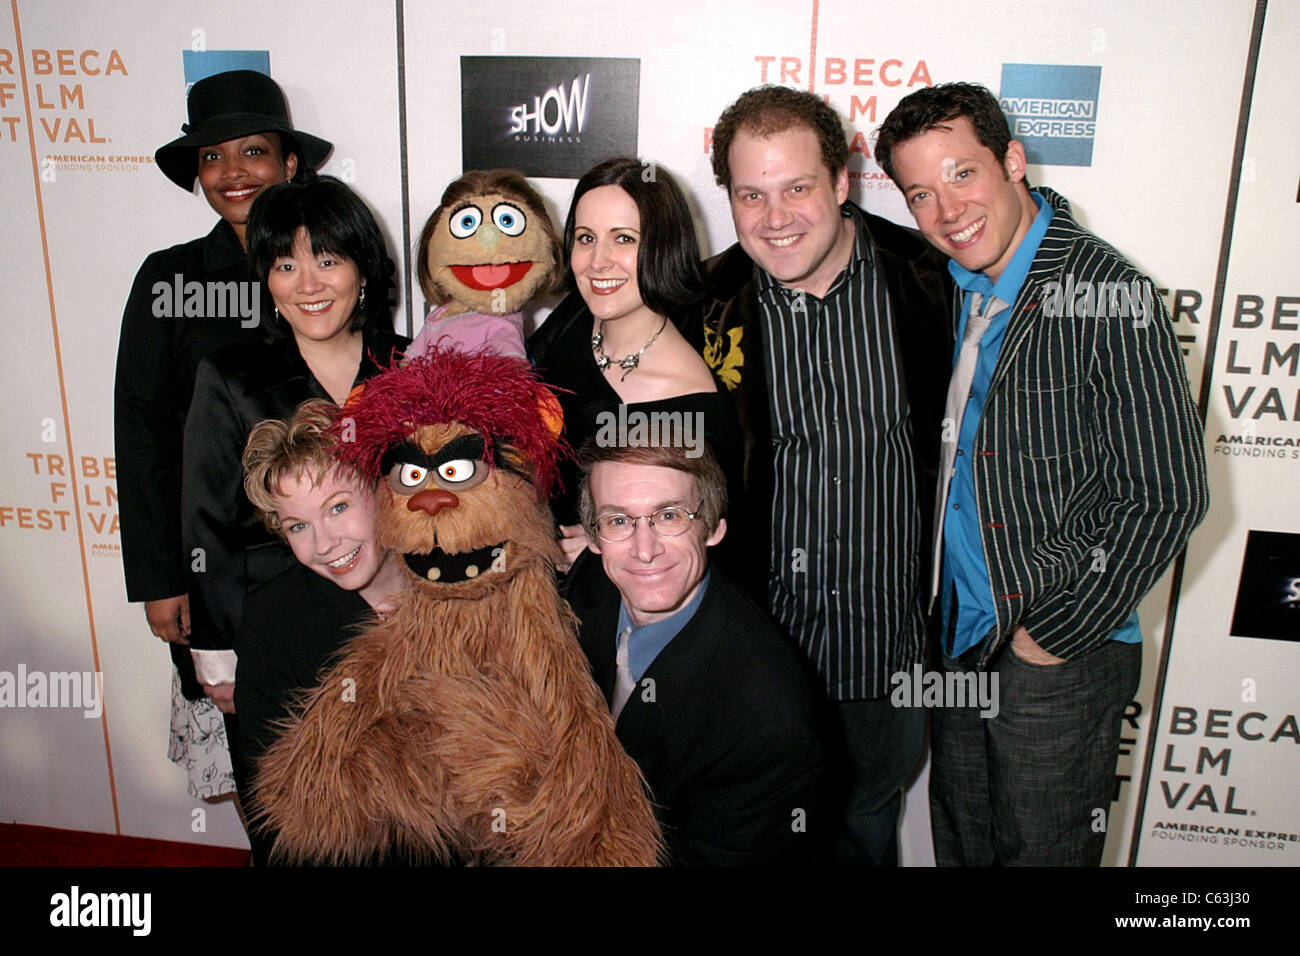 Cast of AVENUE Q at arrivals for SHOW Business World Premiere at Tribeca Film Festival, Tribeca Performing Arts Center, New York, NY, April 25, 2005. Photo by: Rob Rich/Everett Collection Stock Photo